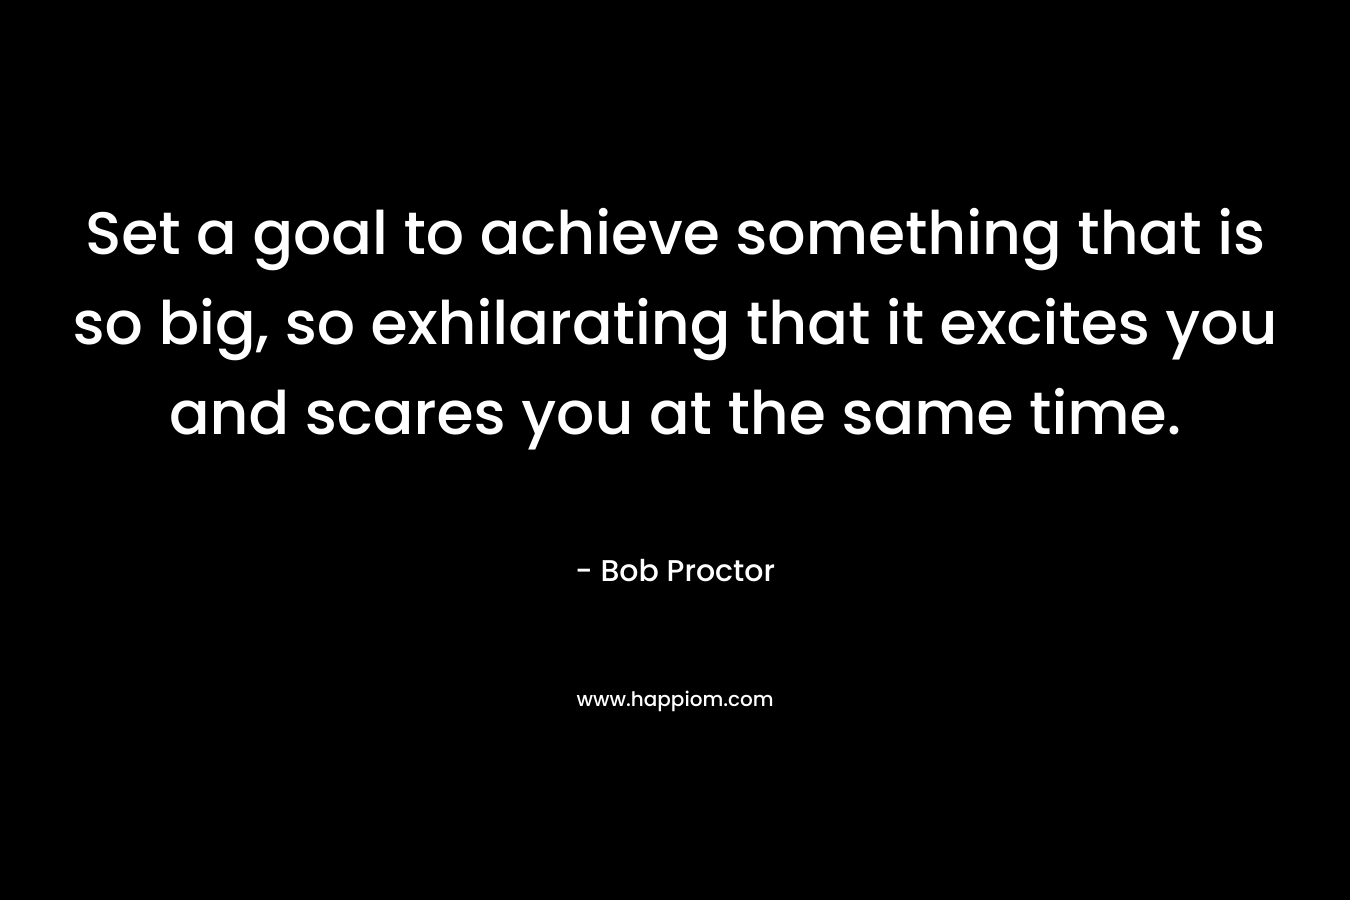 Set a goal to achieve something that is so big, so exhilarating that it excites you and scares you at the same time.